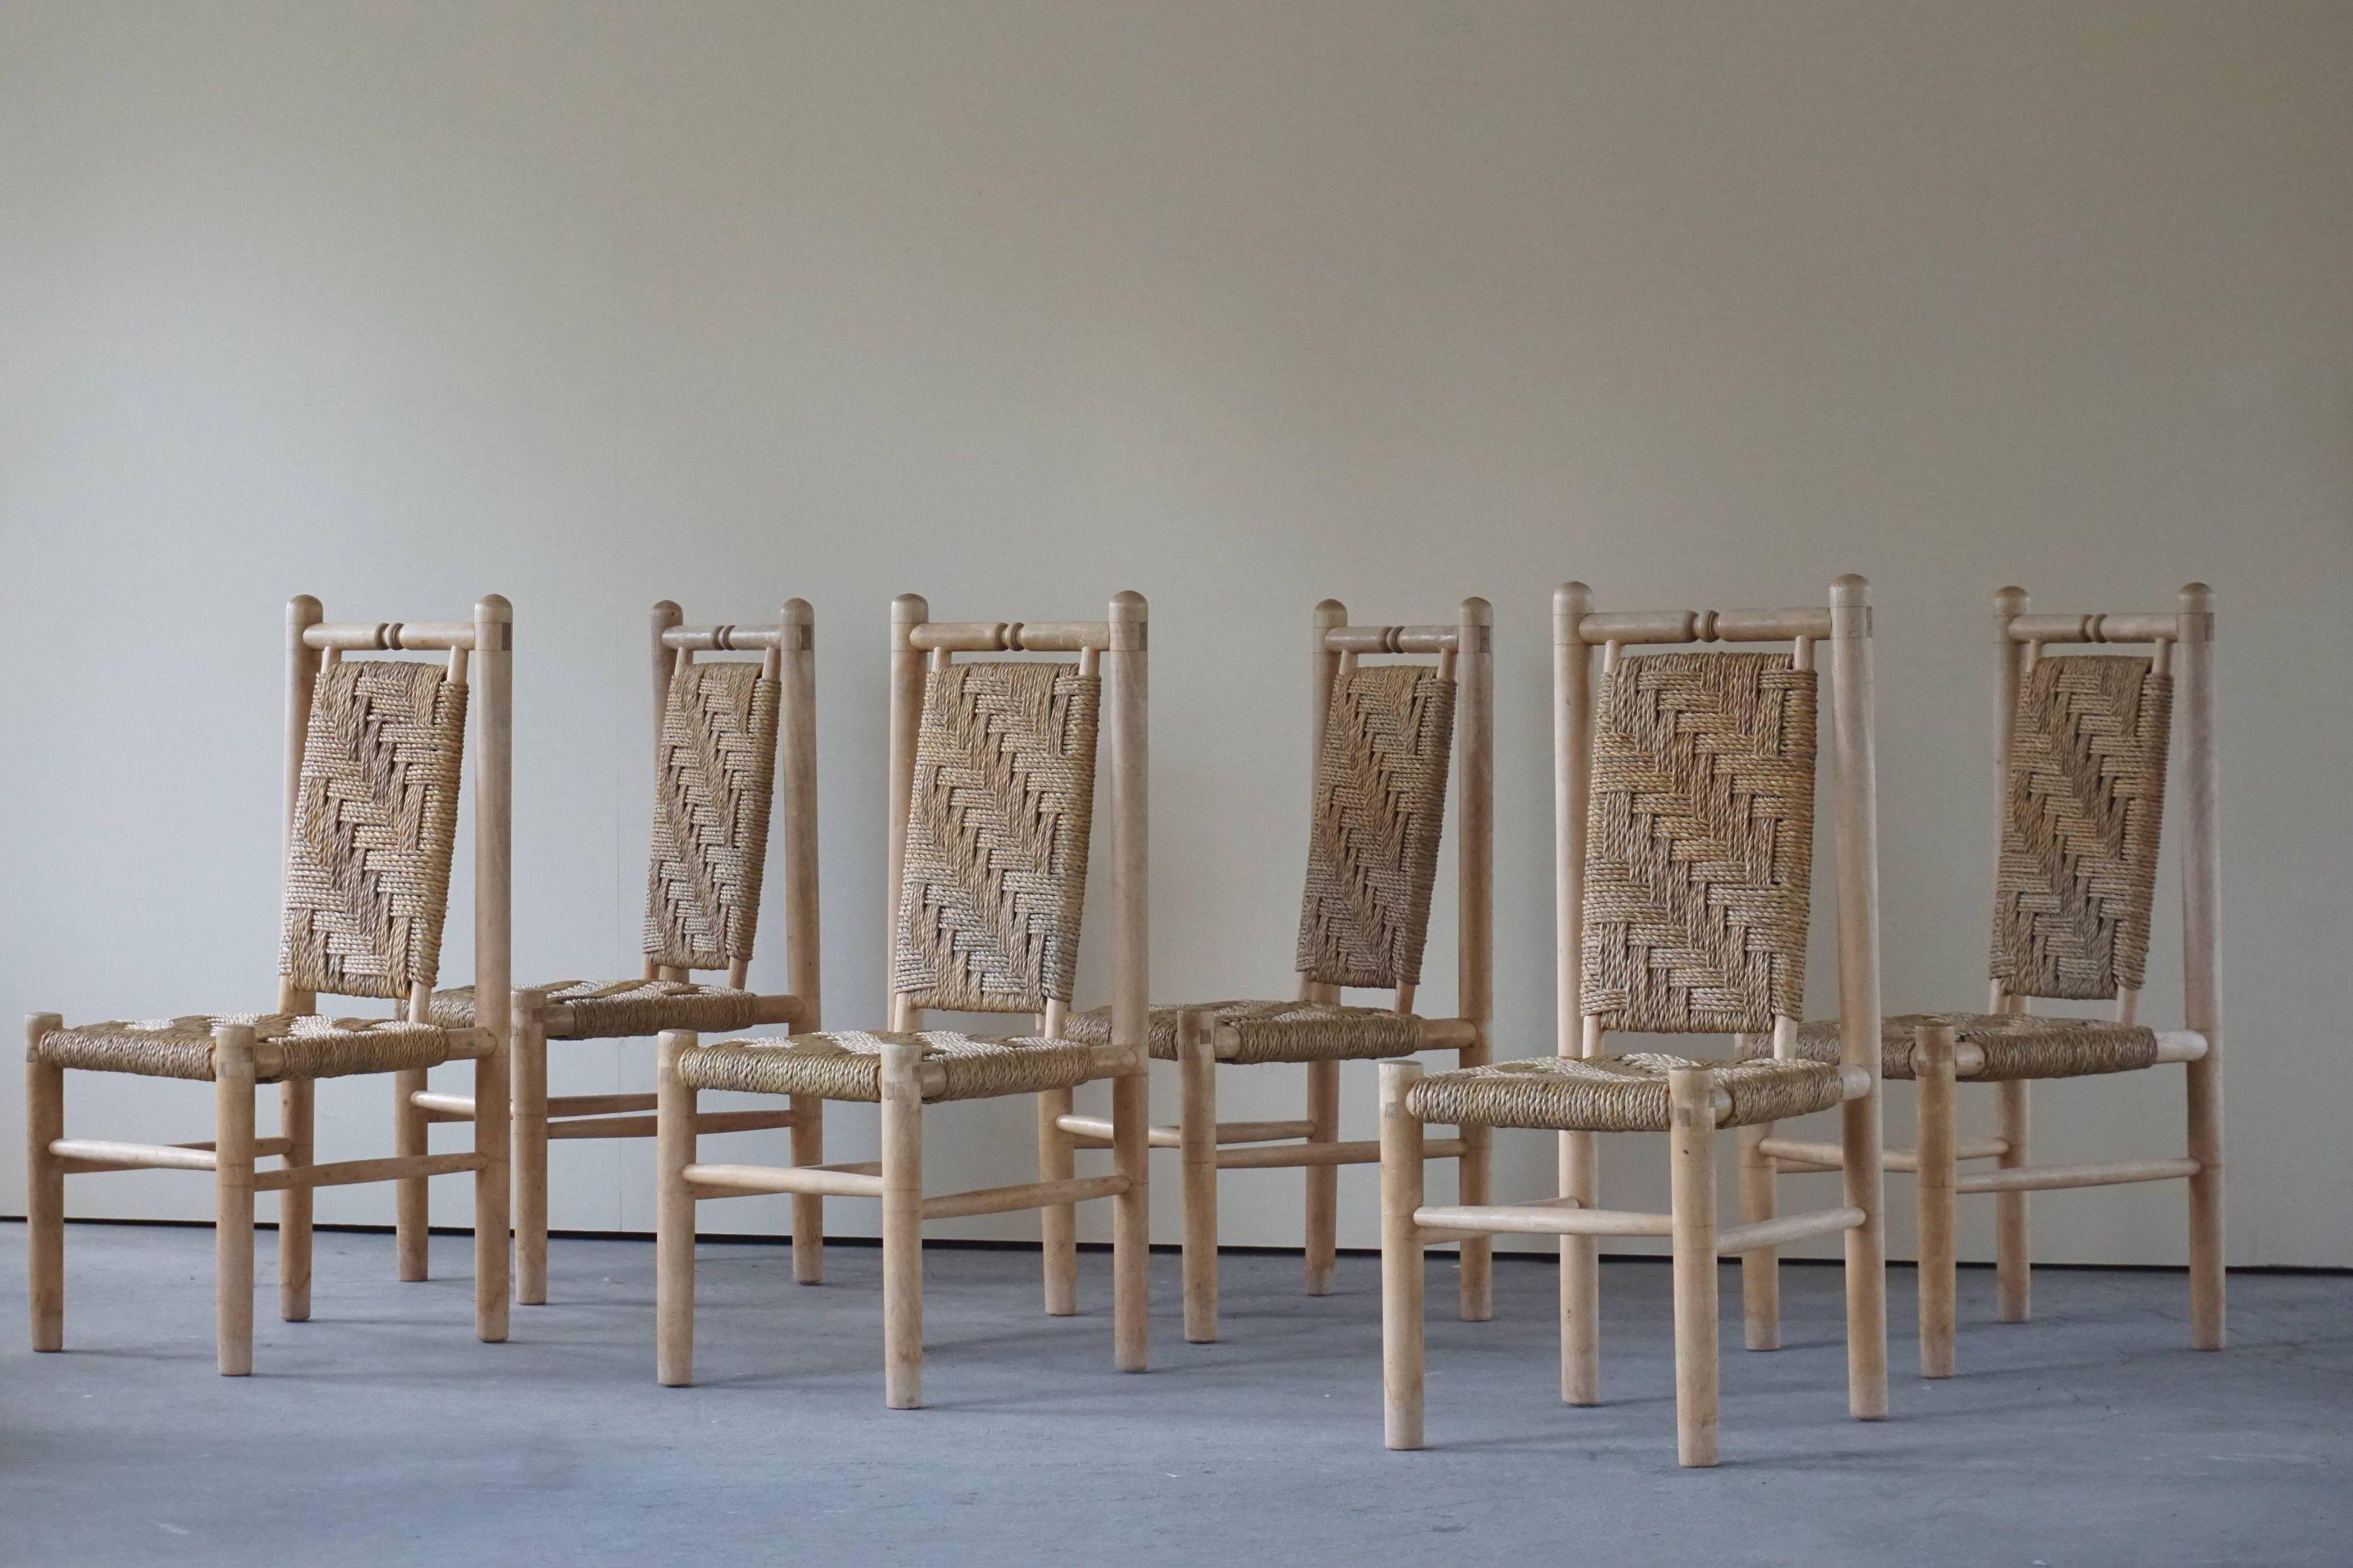 Set of 6 stunning French mid century naturalist woven highback chairs in solid elm, 1960s. Clearly inspired by Charlotte Perriand's wood and straw creations. The combination of the elm structure and the woven seat/back is an organic and stylish mix